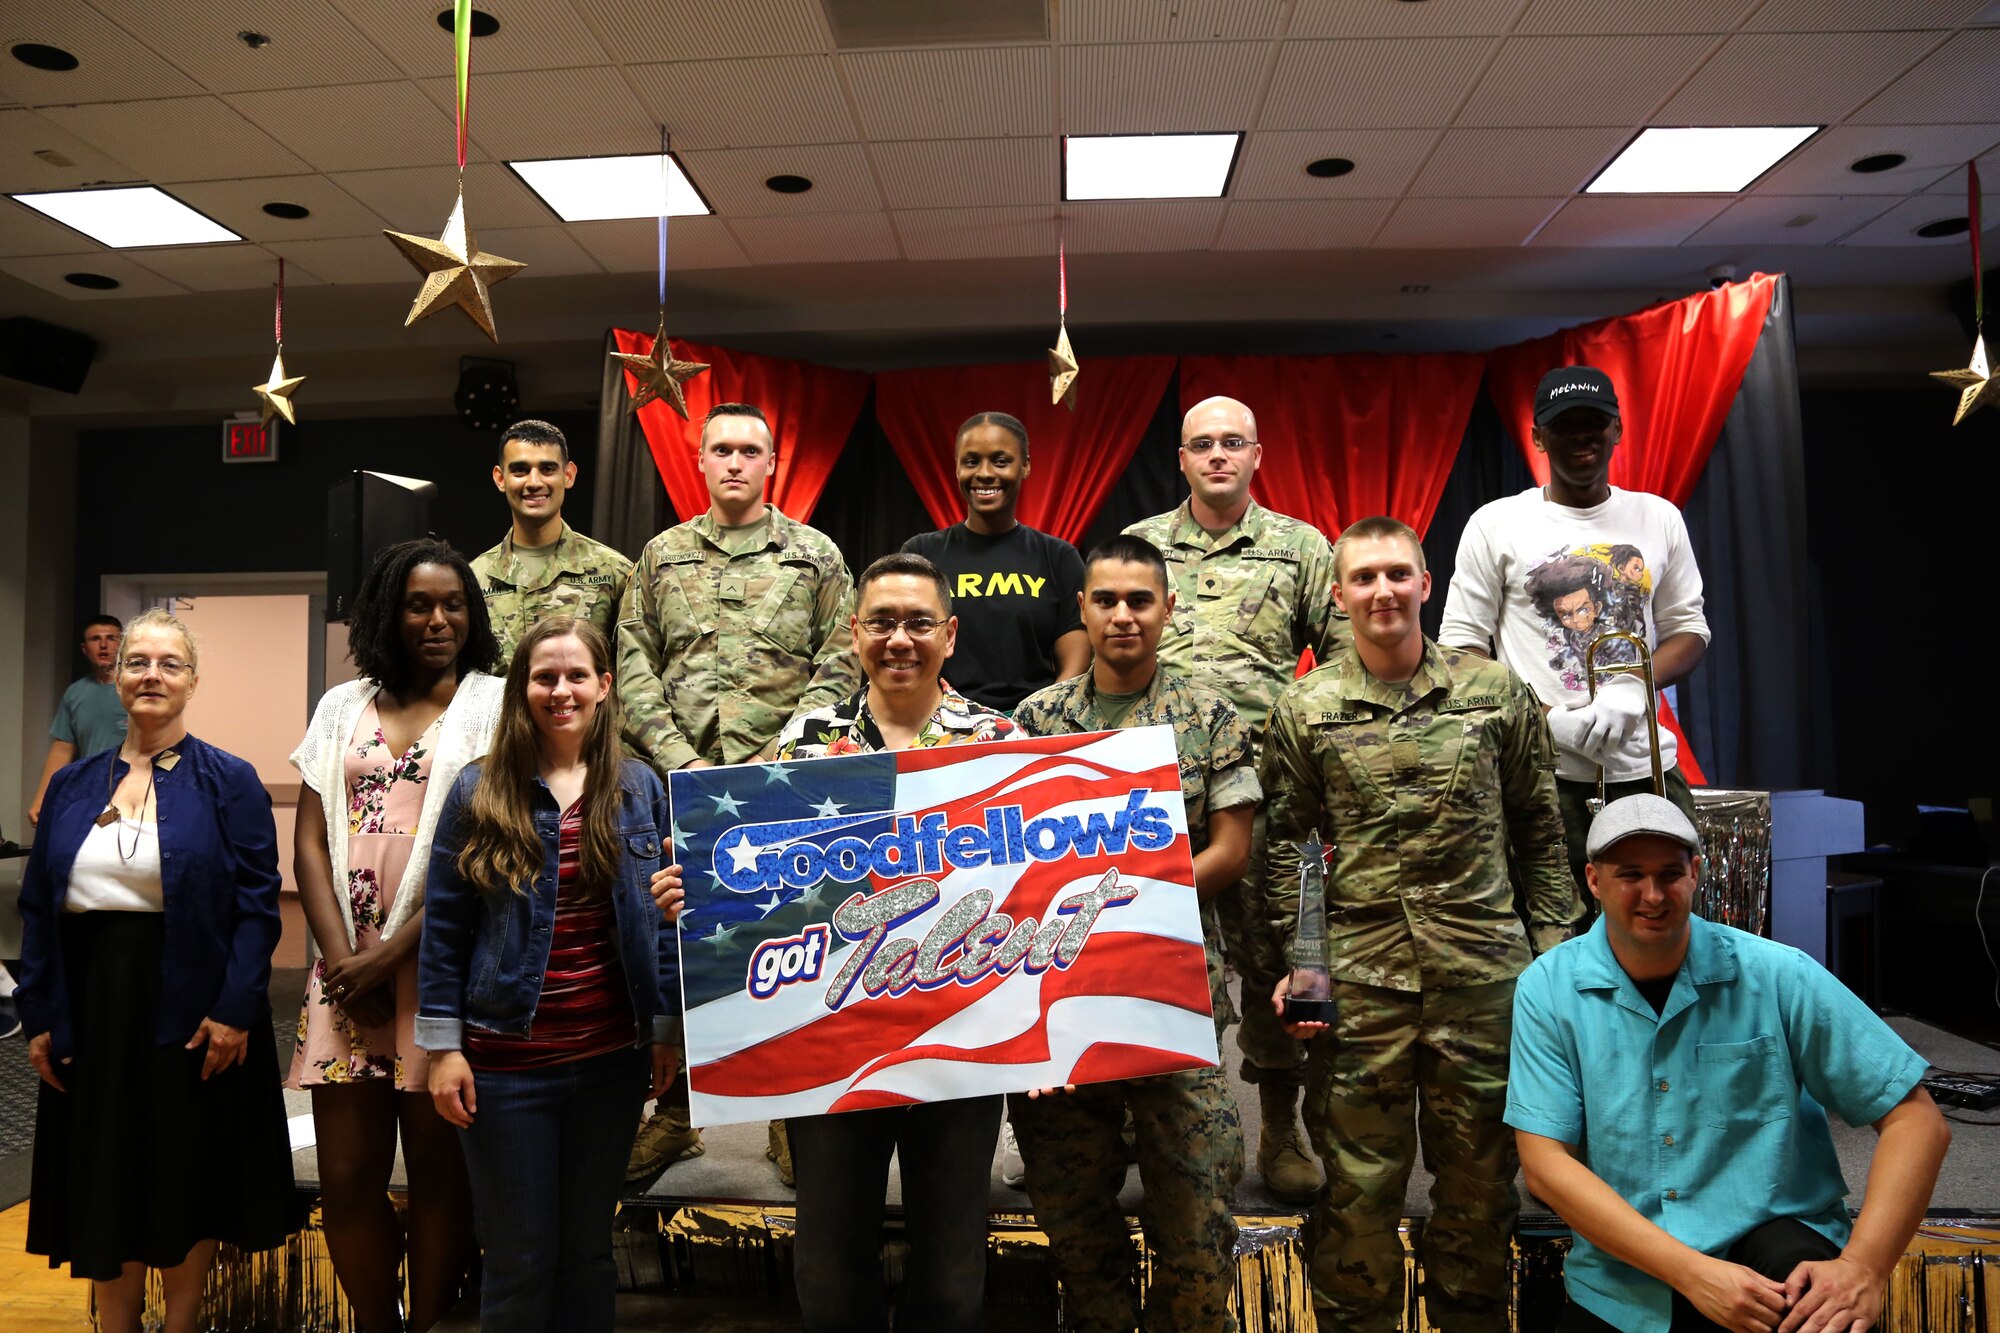 All the participants from Goodfellow’s Got Talent take a moment after the show to pose together at the Event Center on Goodfellow Air Force Base, Texas, June 8, 2018. Enlisted and officers from all of the branches of service at Goodfellow were able to take part in the talent show this year. (Courtesy photo)